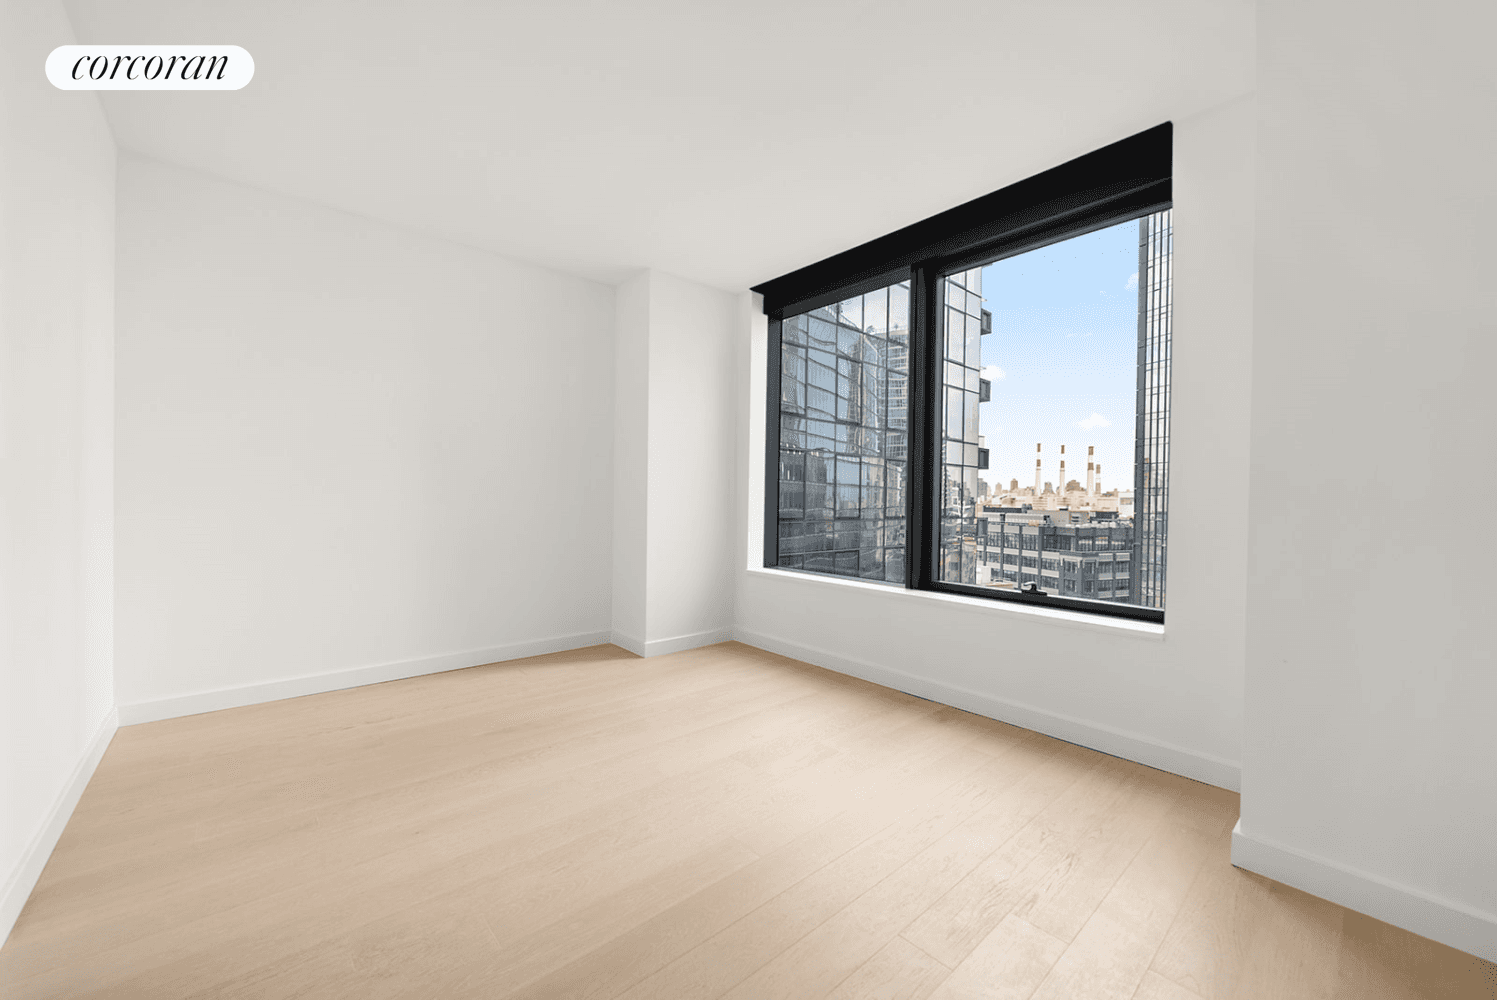 Become the first resident of unit 1006 at Skyline Tower, 3 Court Square, a modern studio unit with beautiful finishes, an LG washer dryer, premium appliances, high ceilings, a walk ...